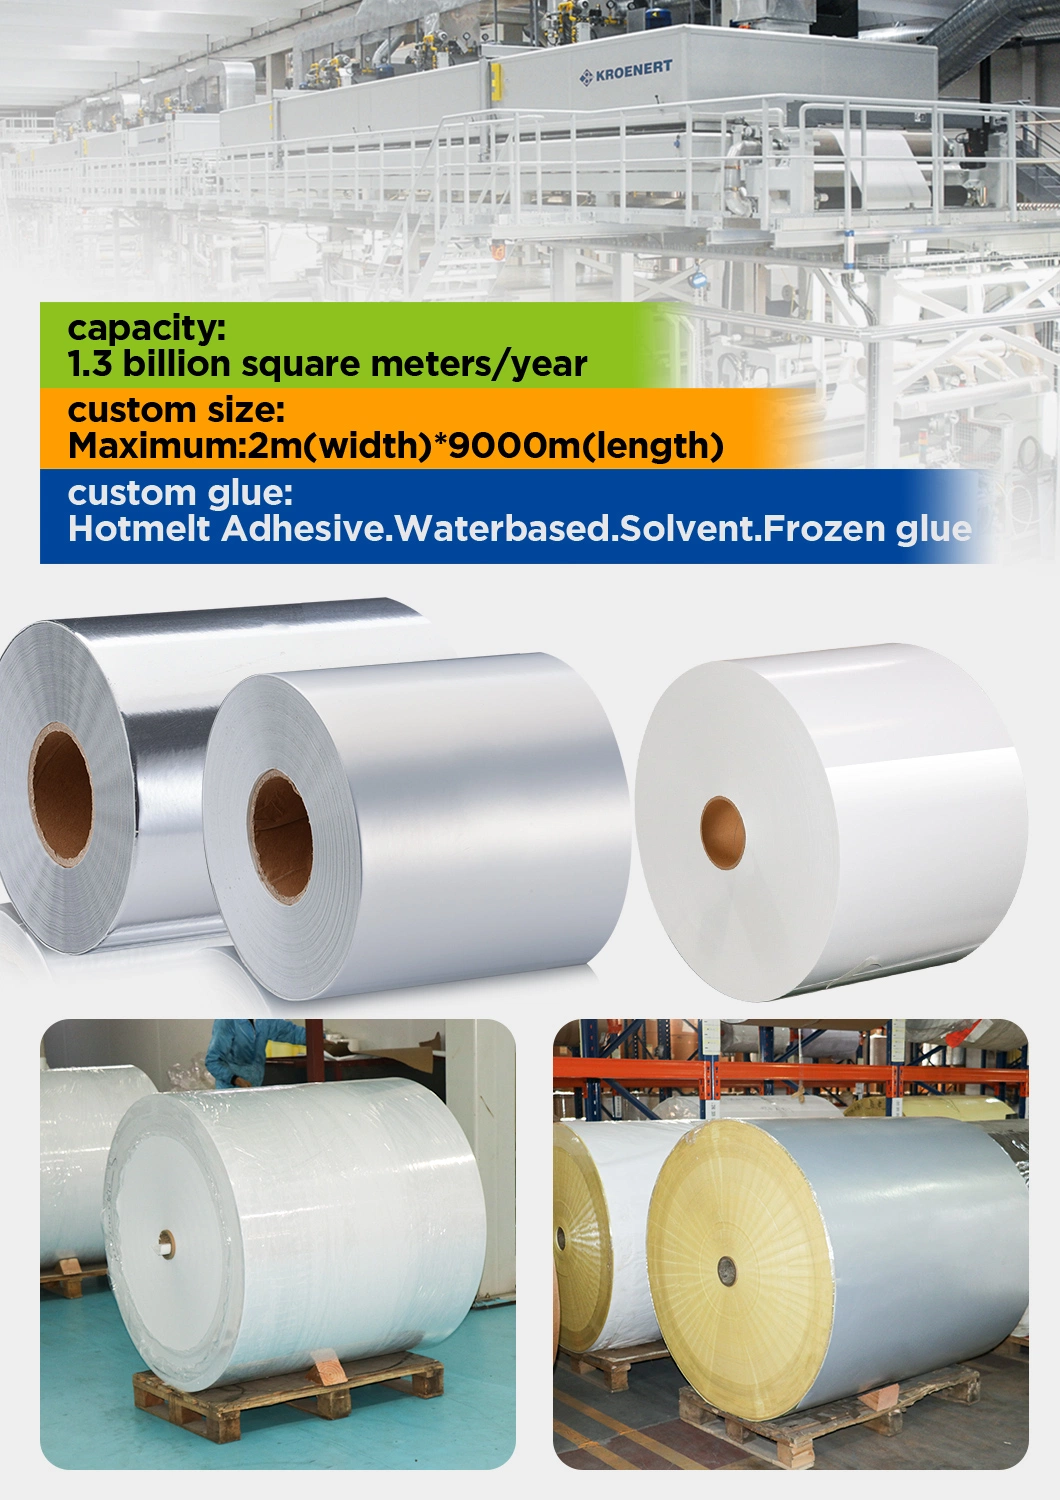 Self Adhesive Coated Paper Label Materials For Offset Printing And Flexo Printing With Good Quality And Best Price